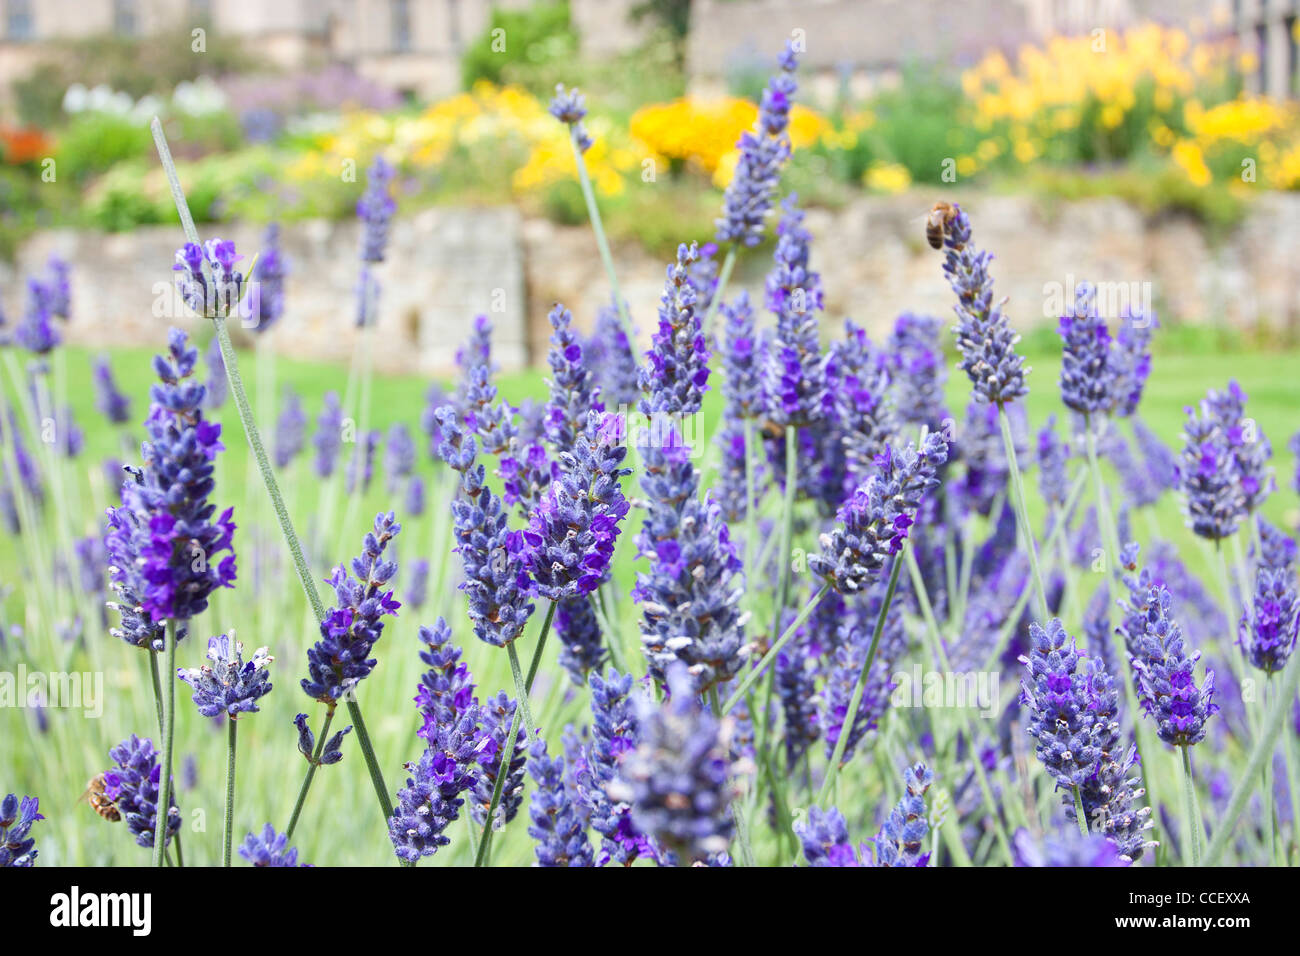 Typical english country garden with lavendar bush in the foreground Stock Photo